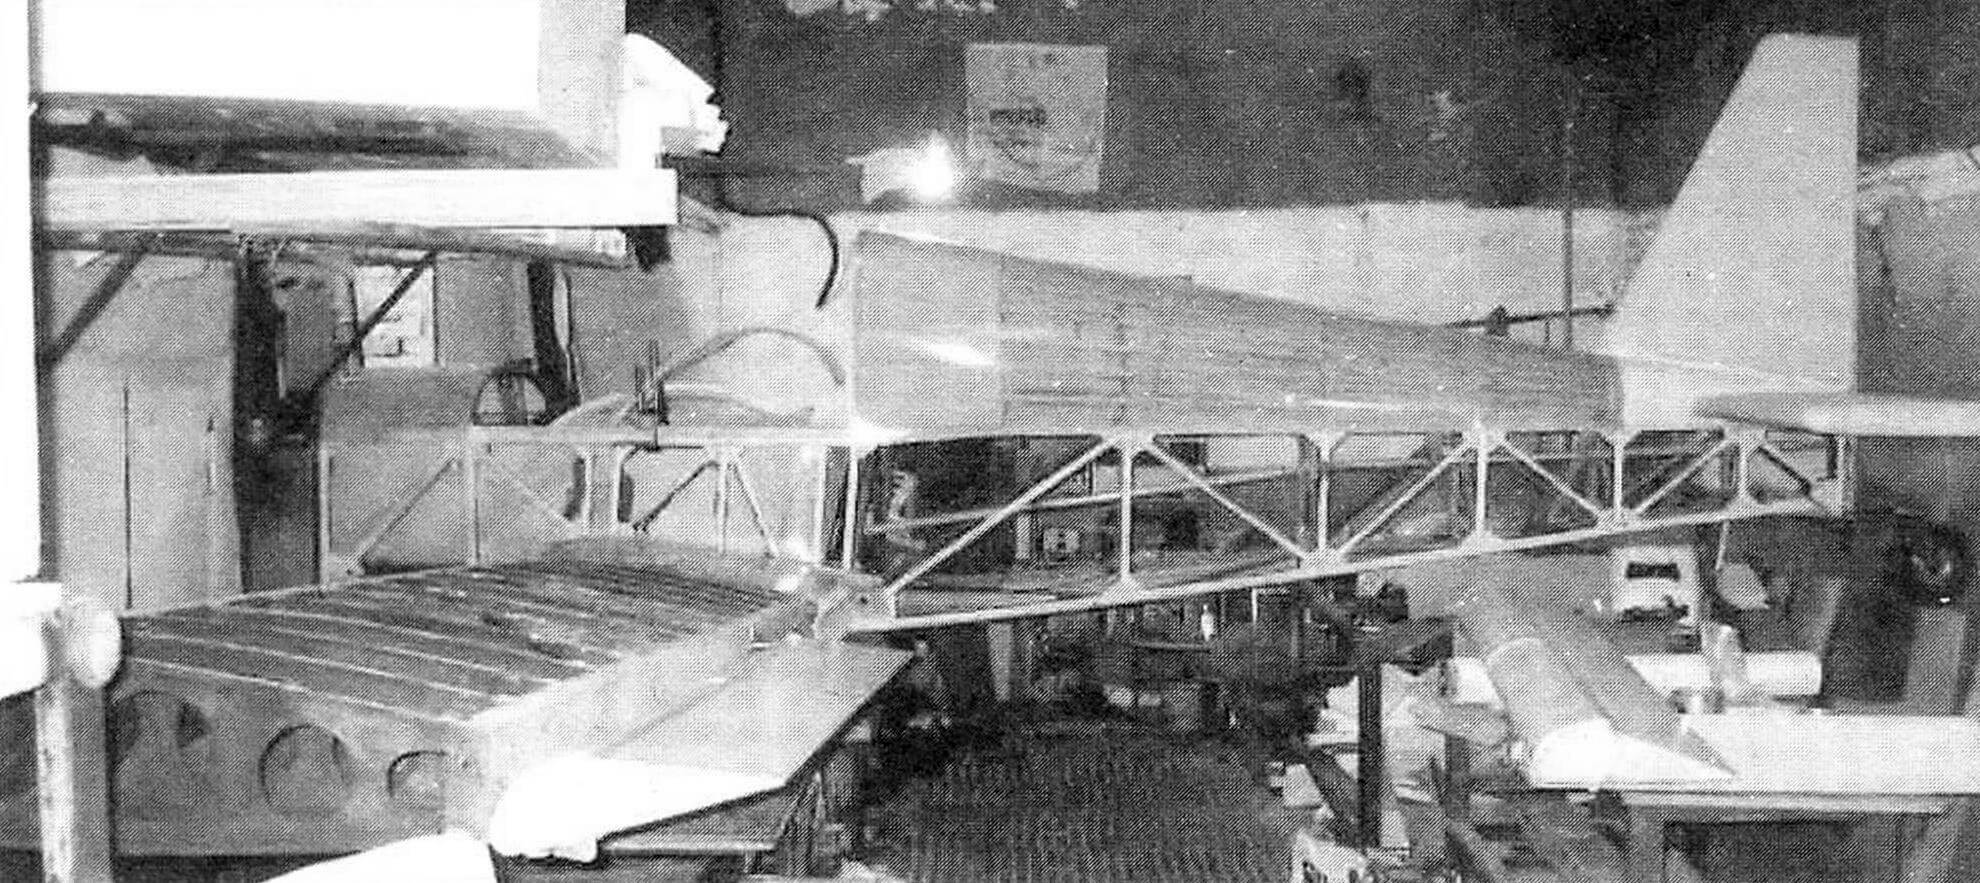 Assembly of the F-3 aircraft